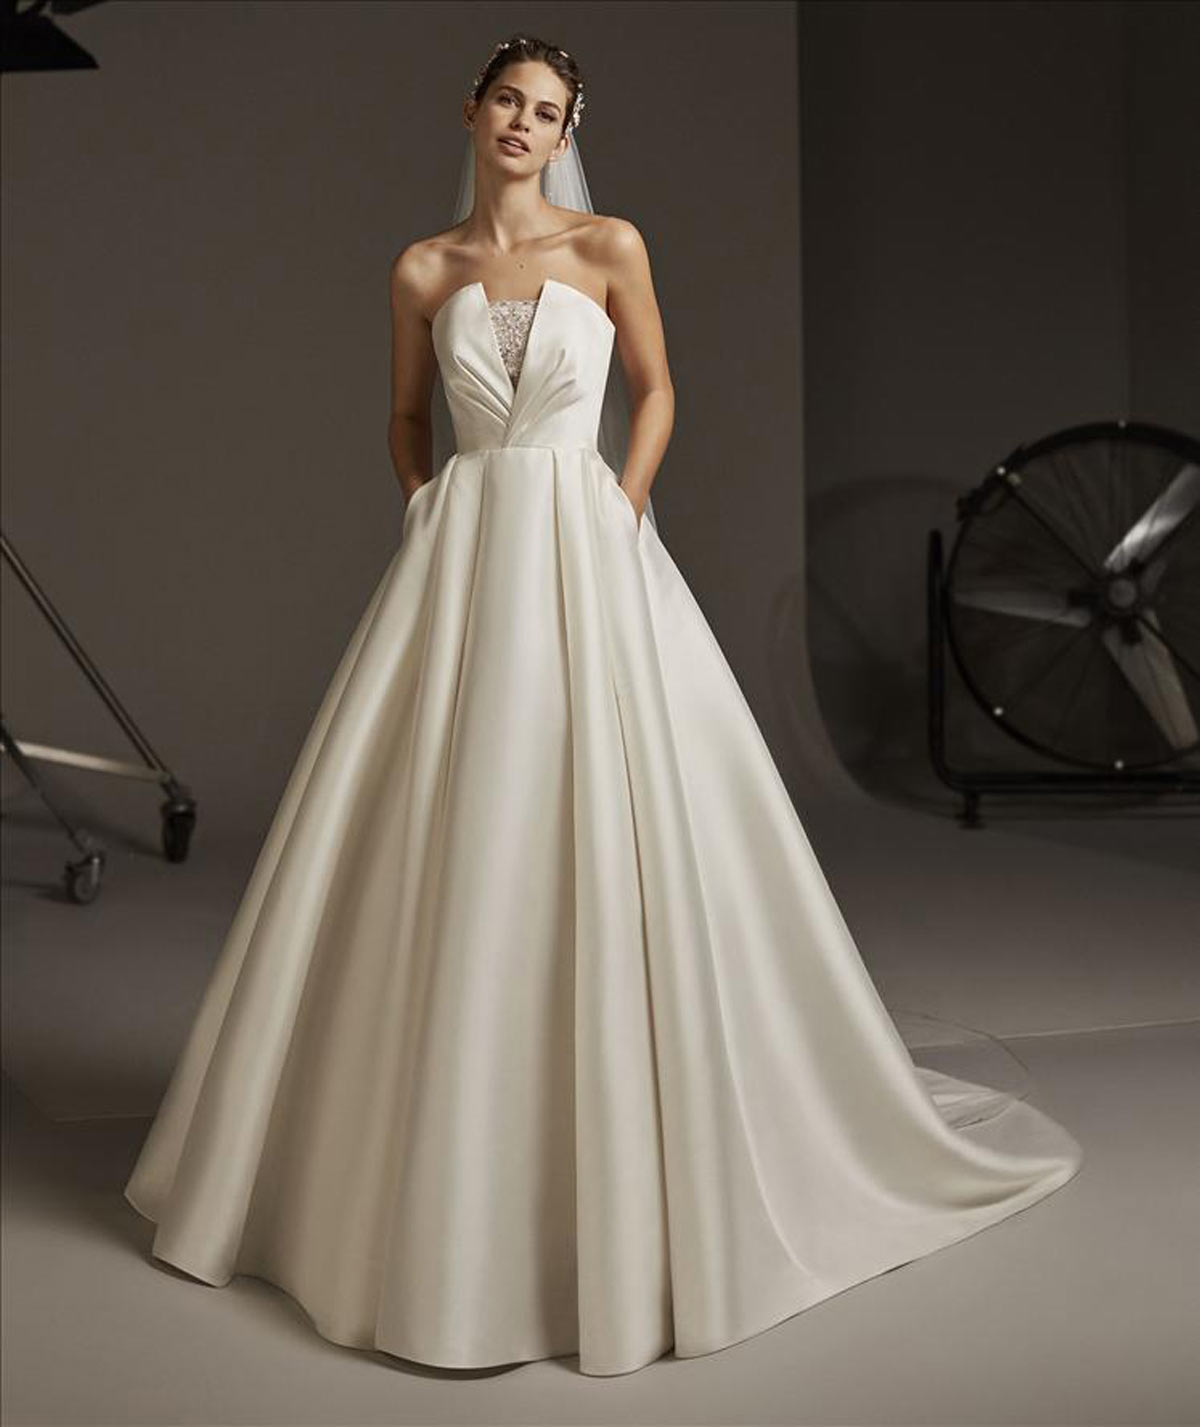 New collections at The Wedding Company